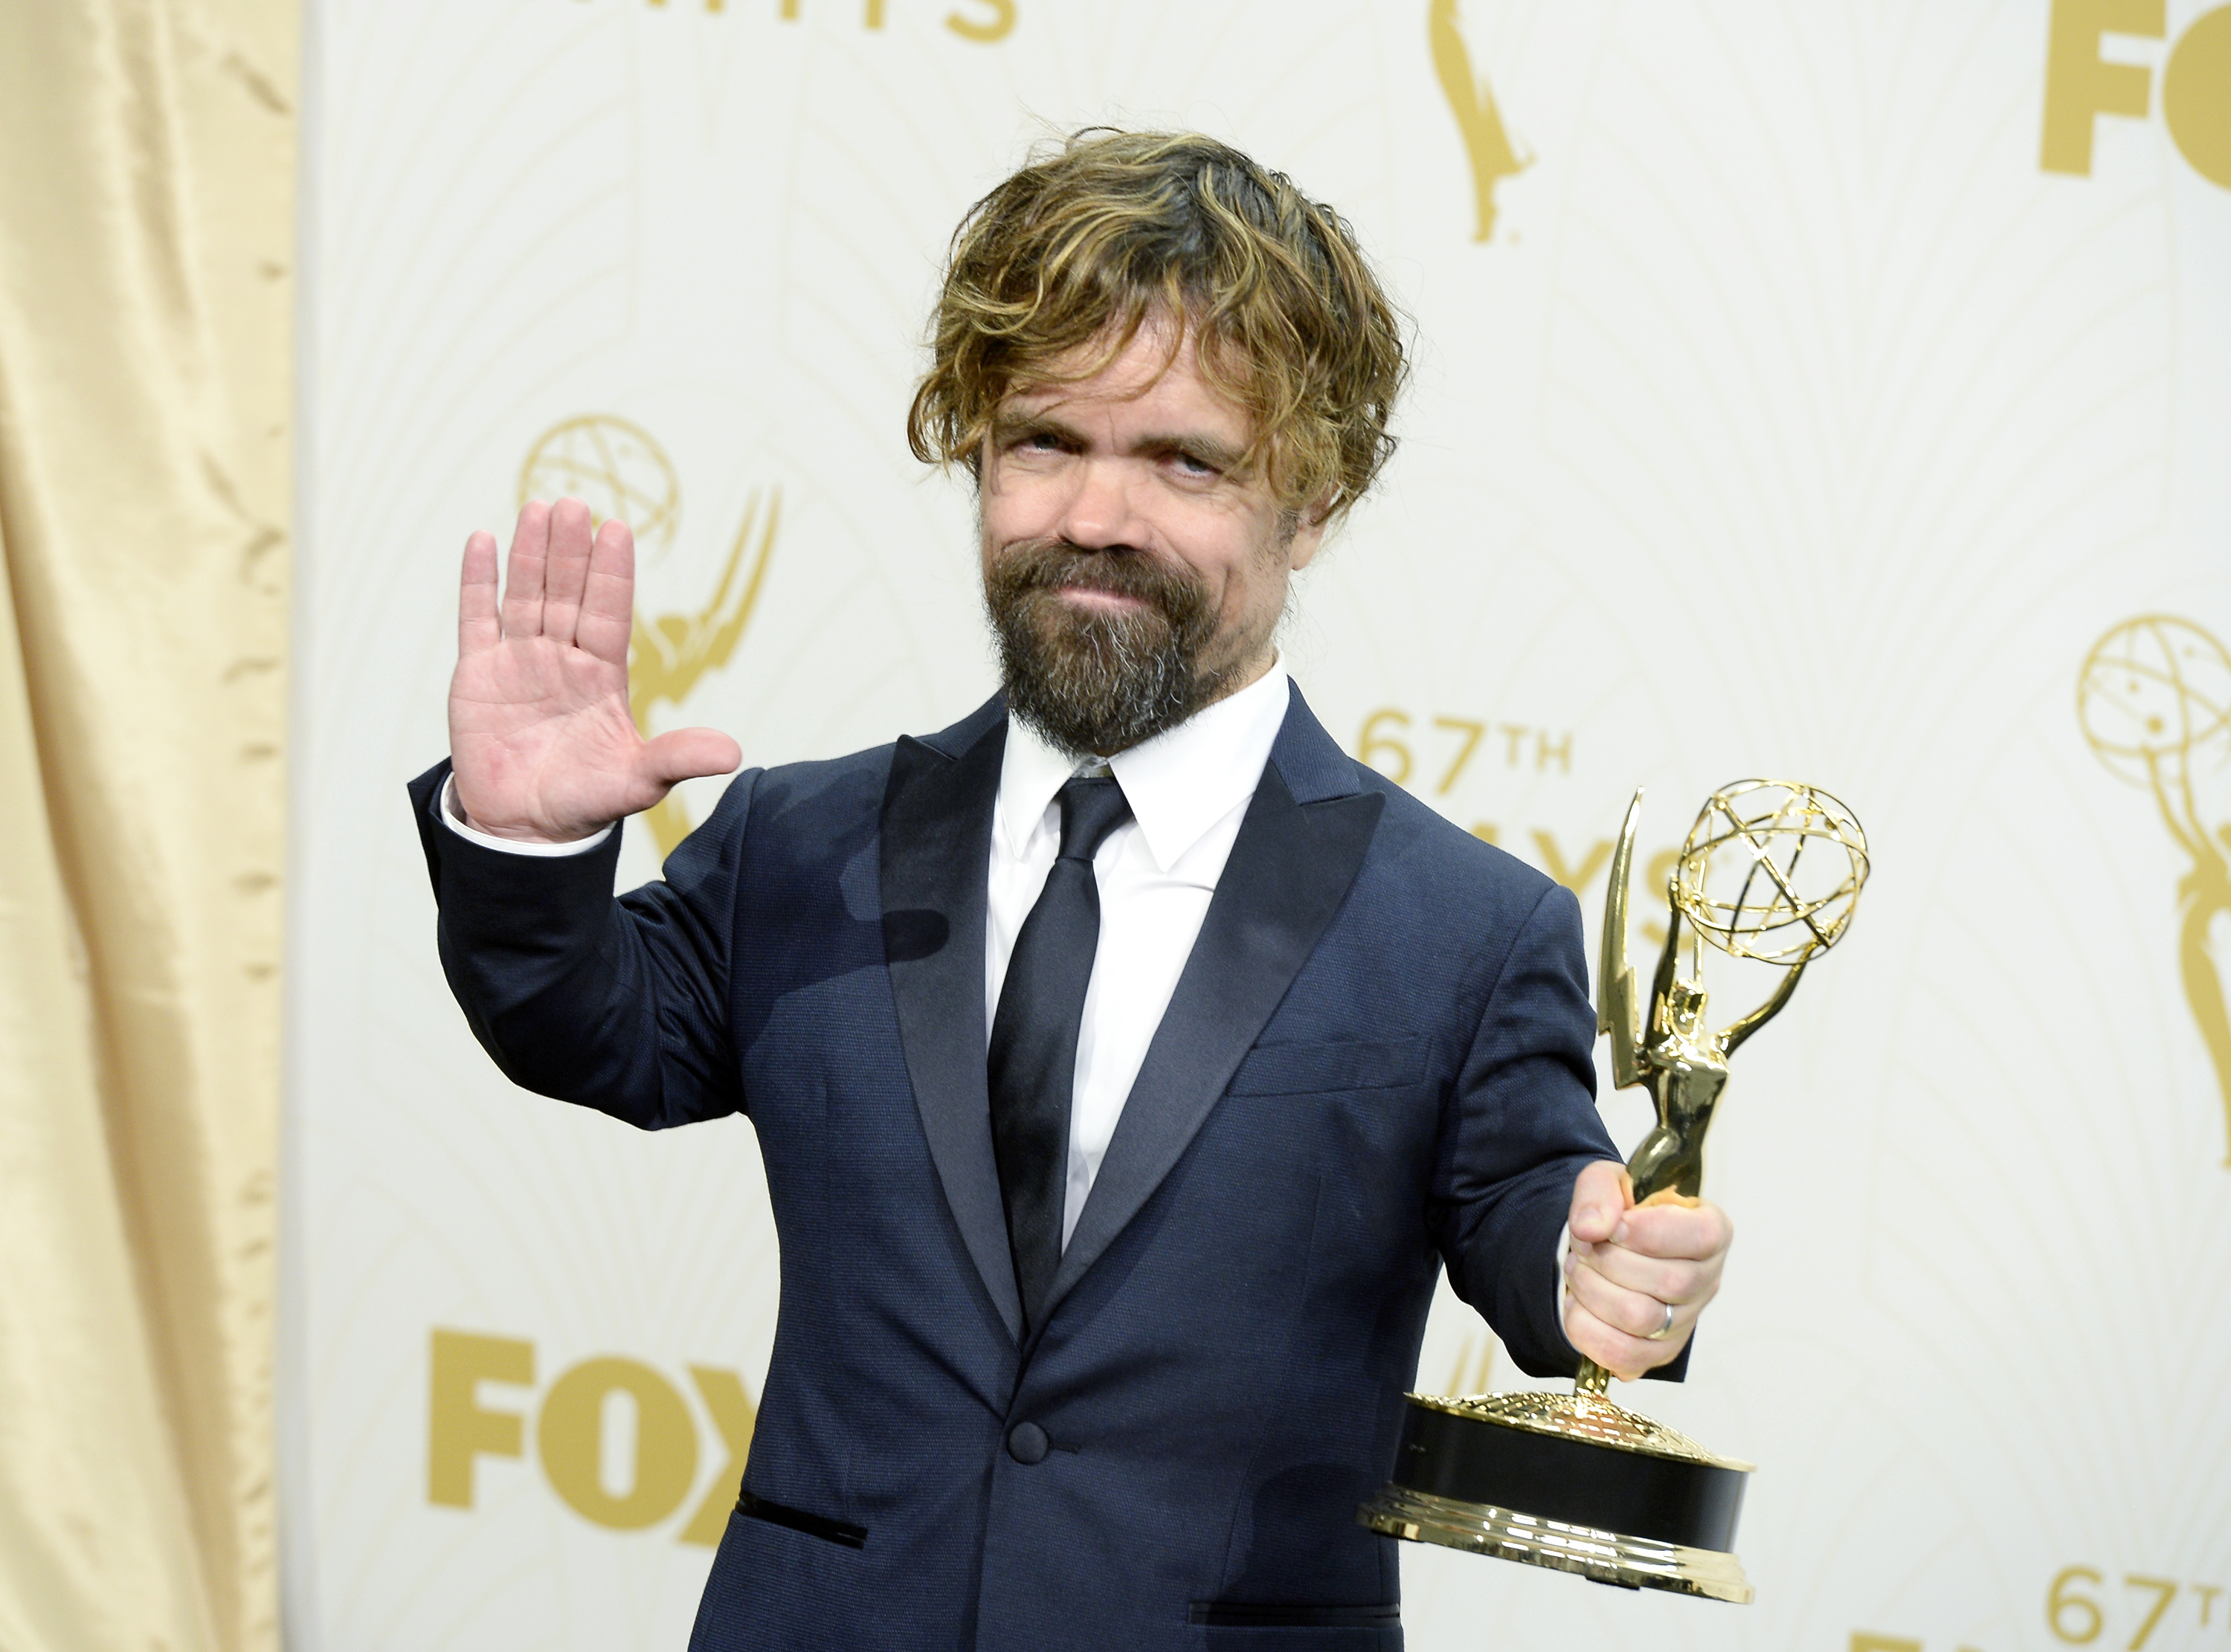 Disney Responds To Peter Dinklage’s Complaints About “Snow White” Live-Action Film